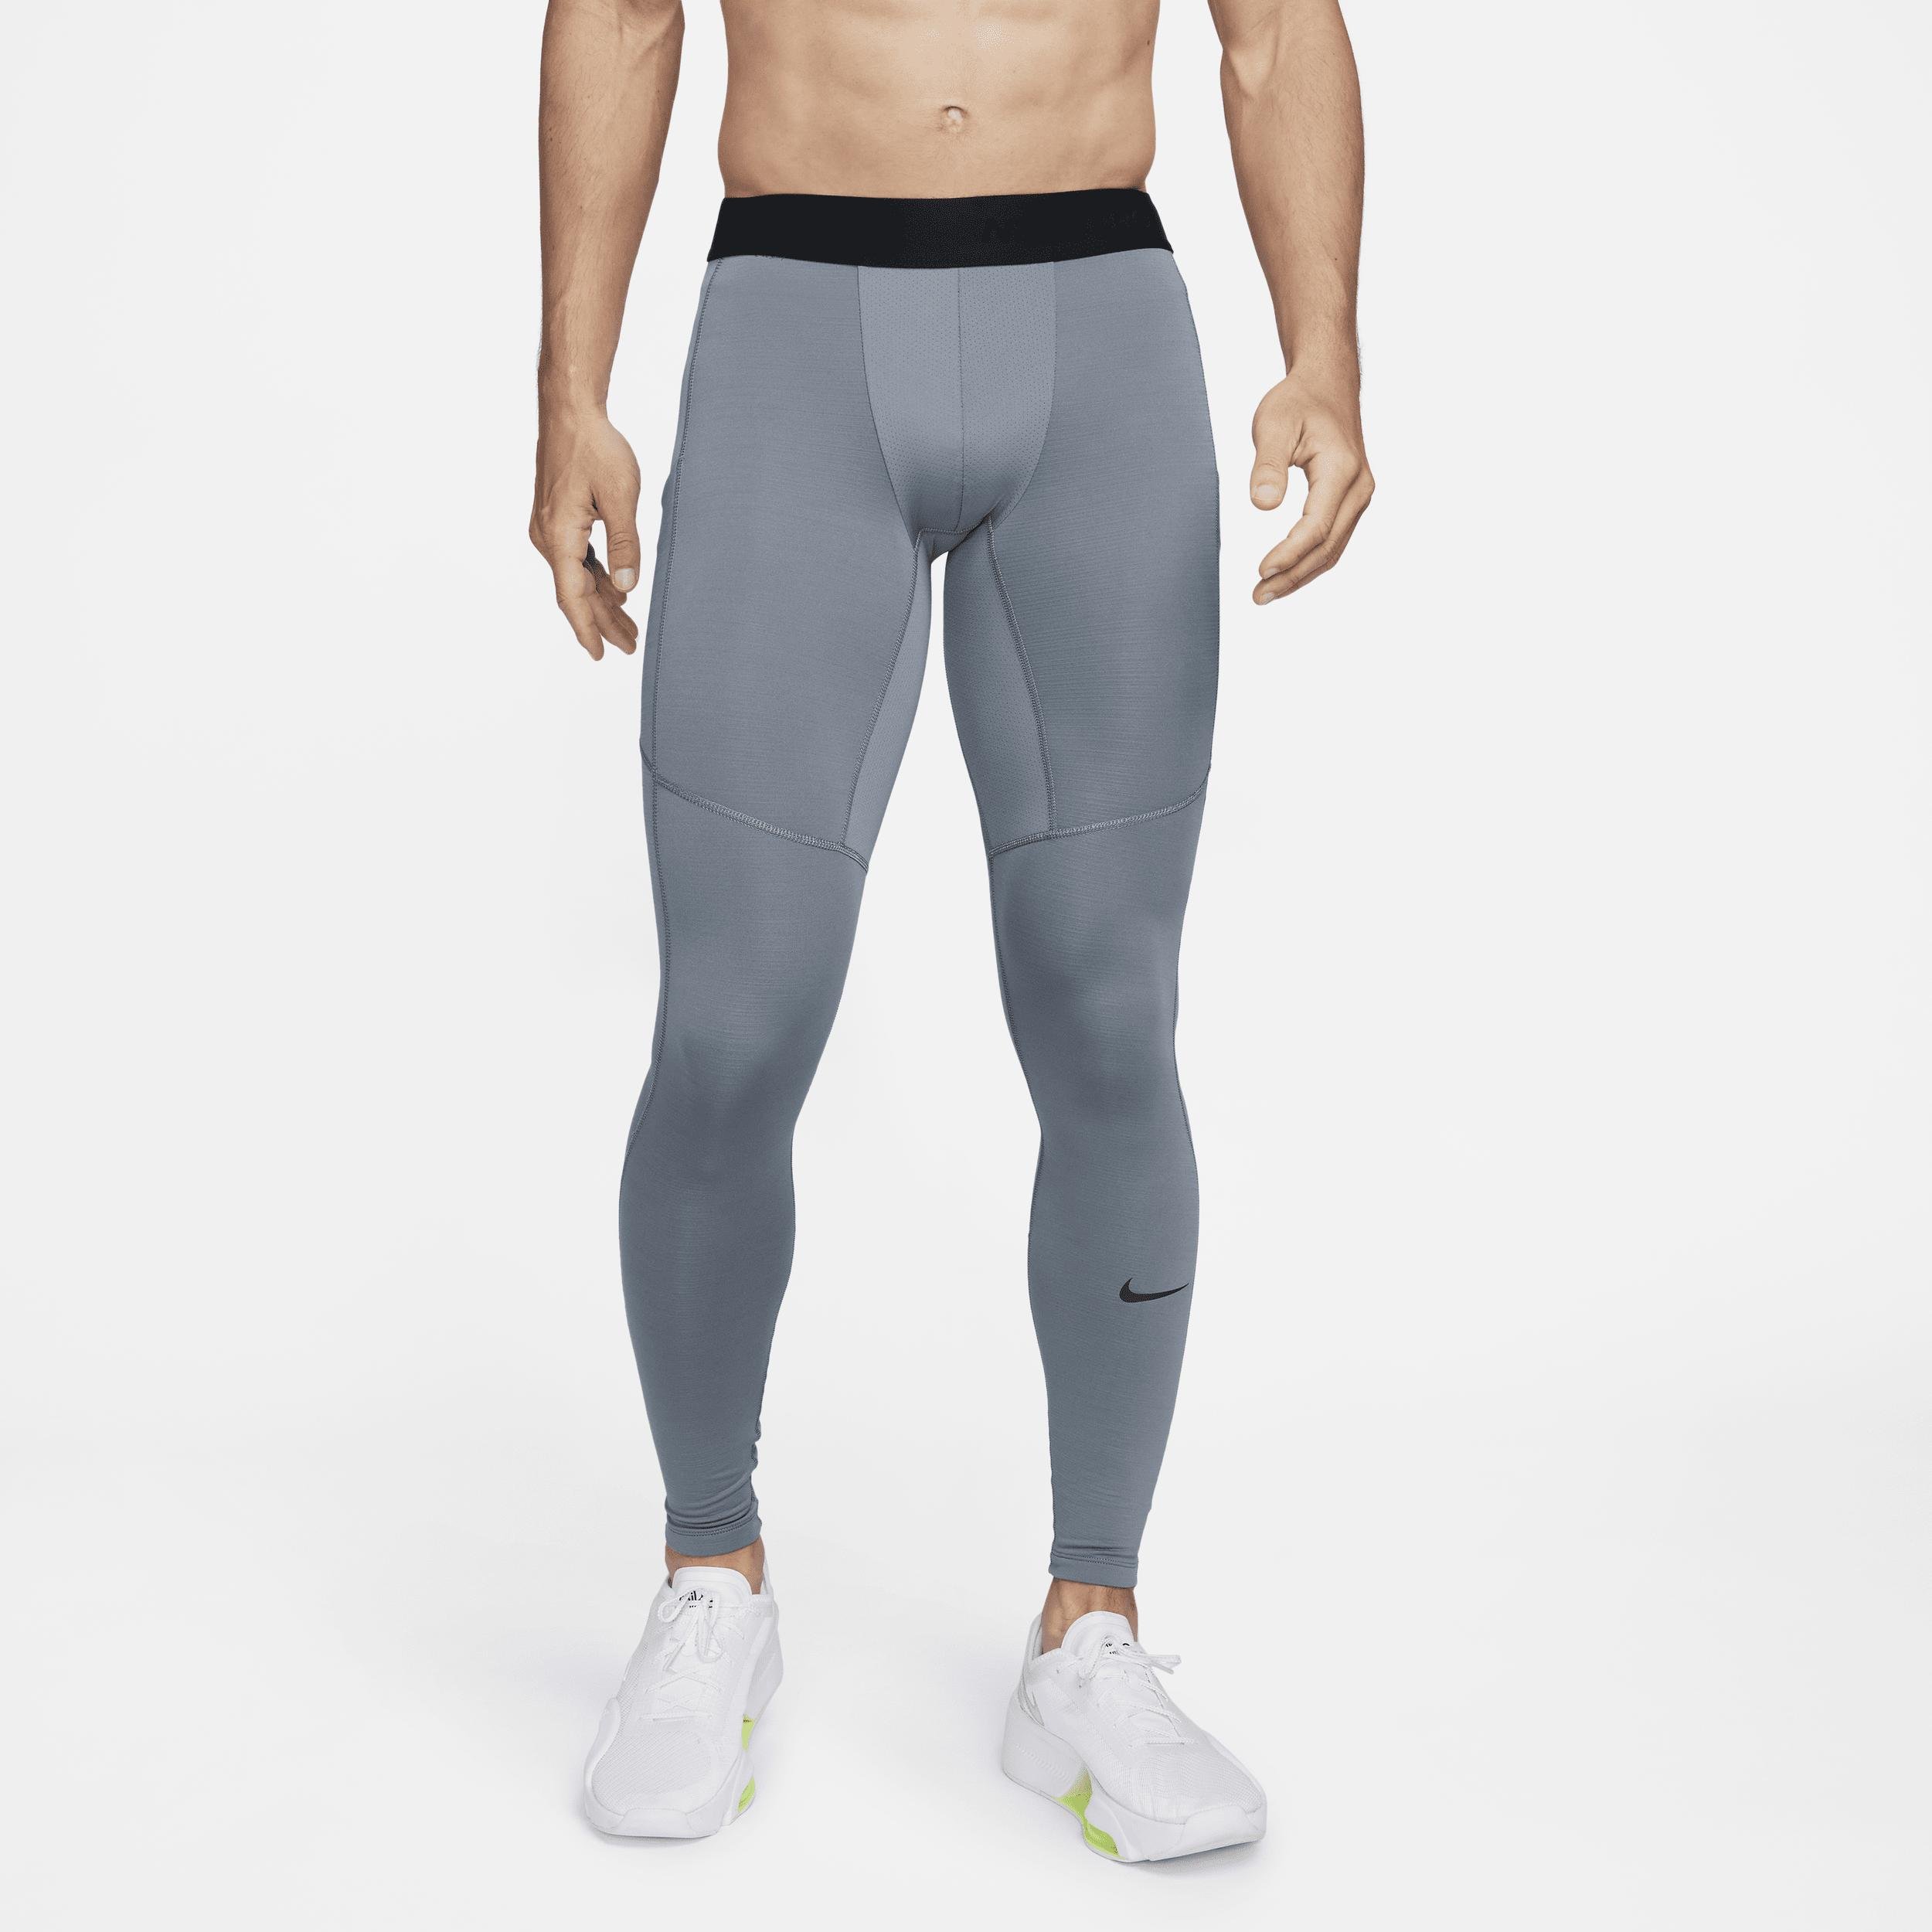 Men's Nike Pro Warm Tights by NIKE